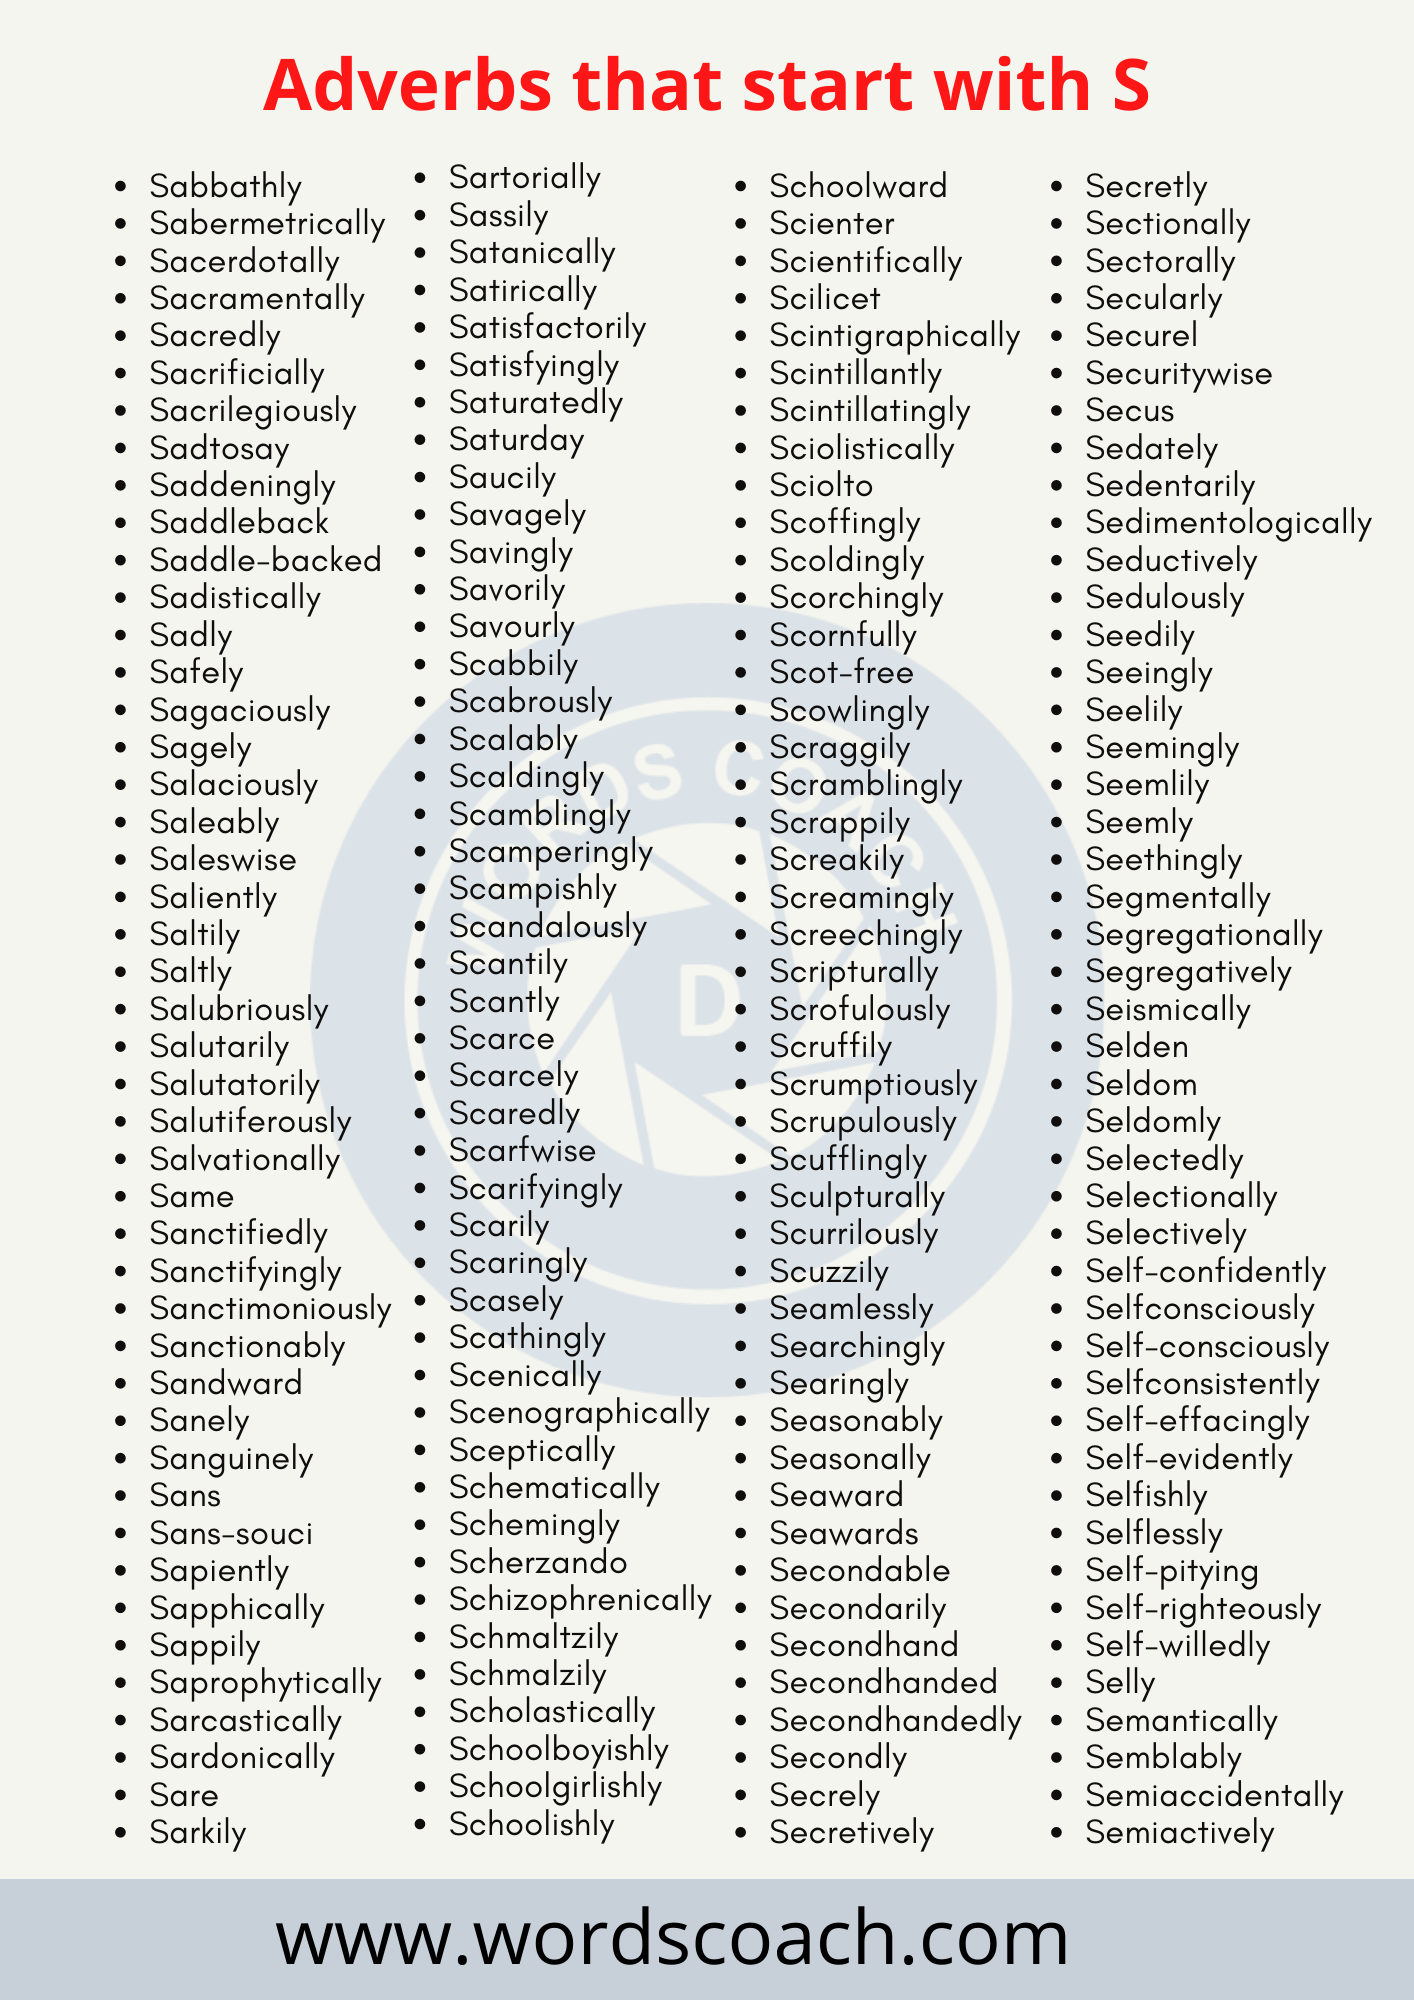 Adverbs that start with S - wordscoach.com